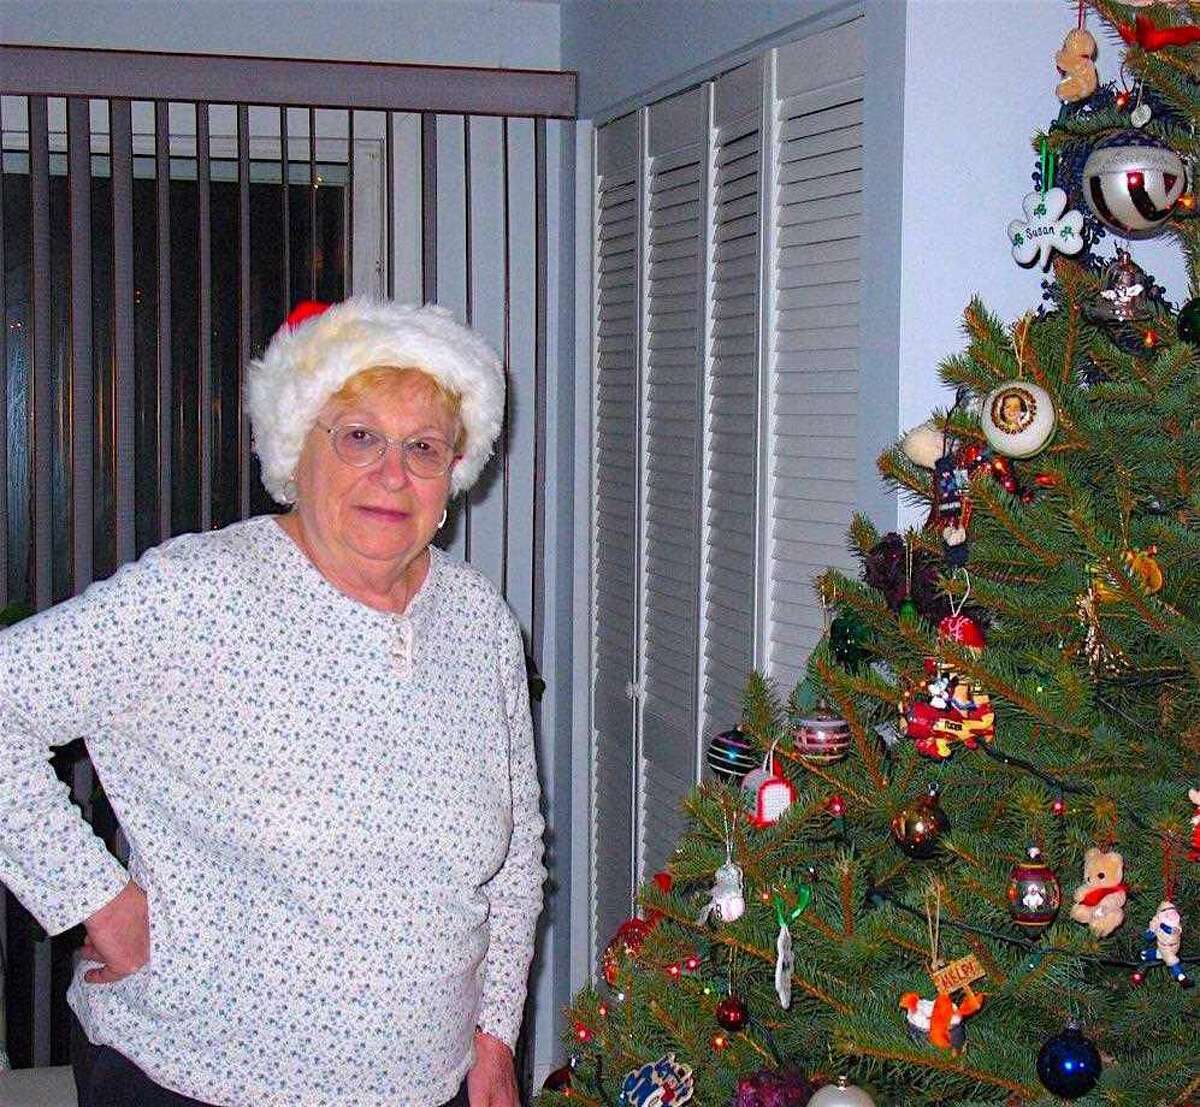 Carol "Nonnie" Mulqueen, whose Christmas dream has led to an enormous annual toy drive.